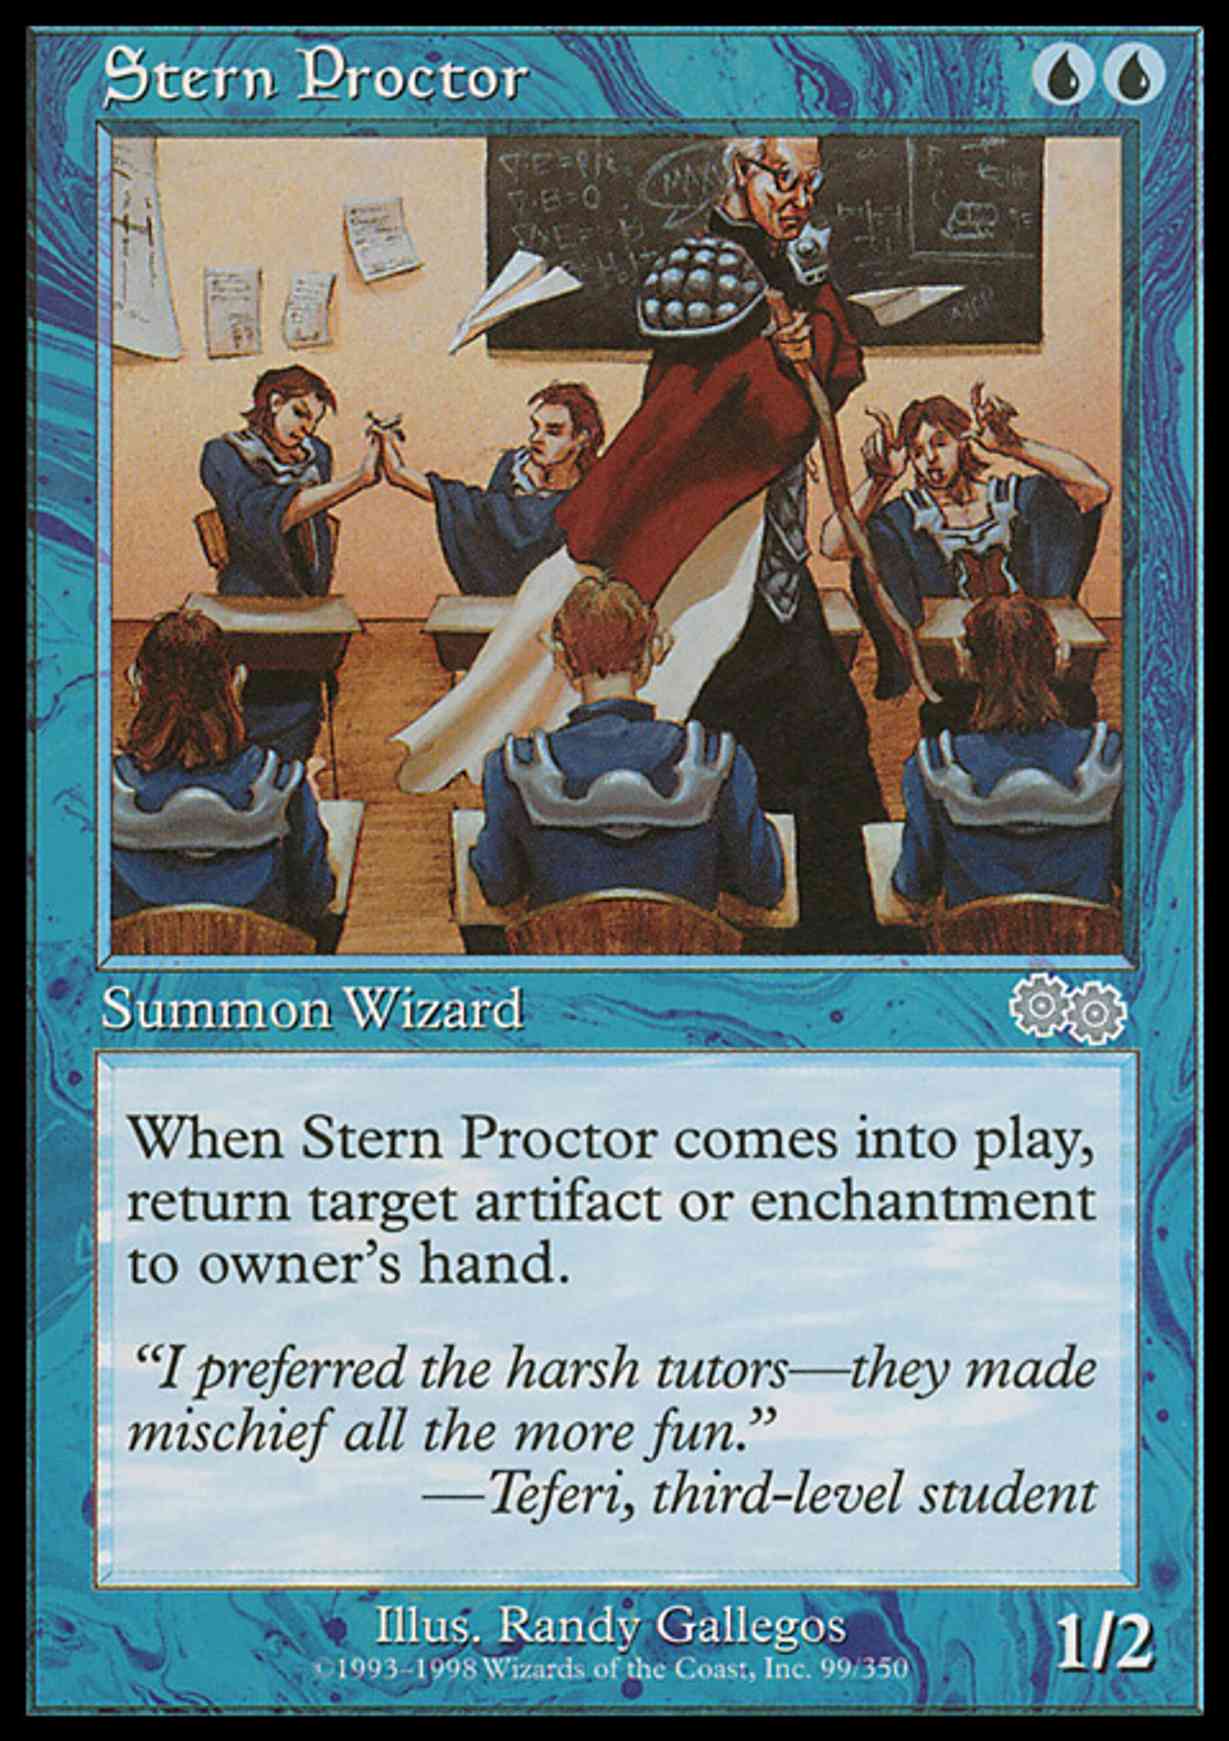 Stern Proctor magic card front